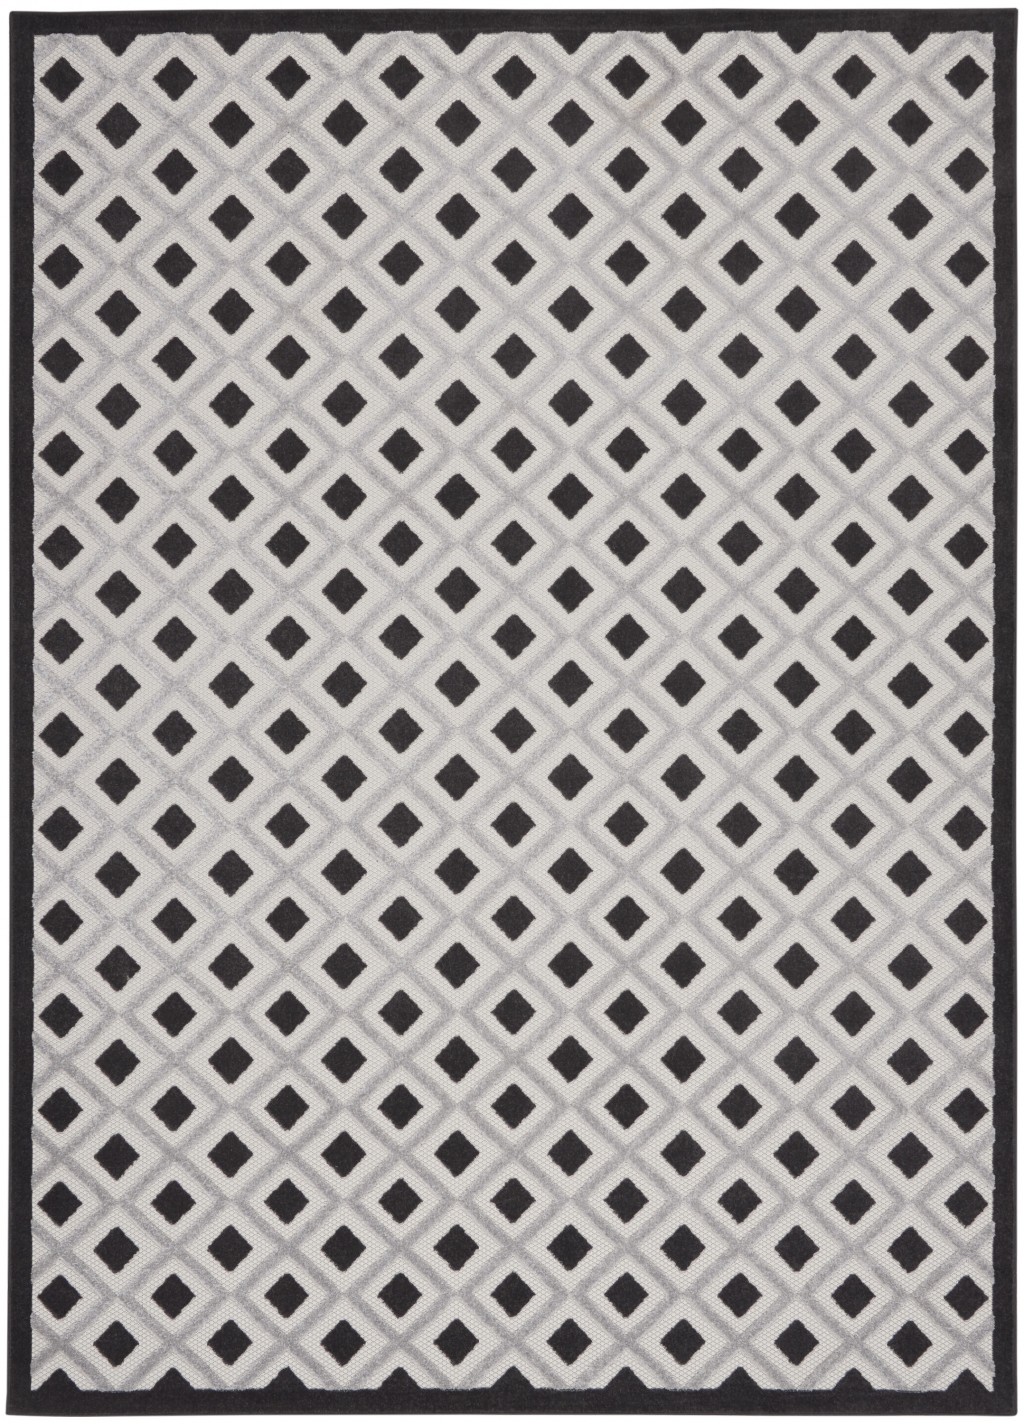 7' X 10' Black And White Geometric Indoor Outdoor Area Rug-385143-1